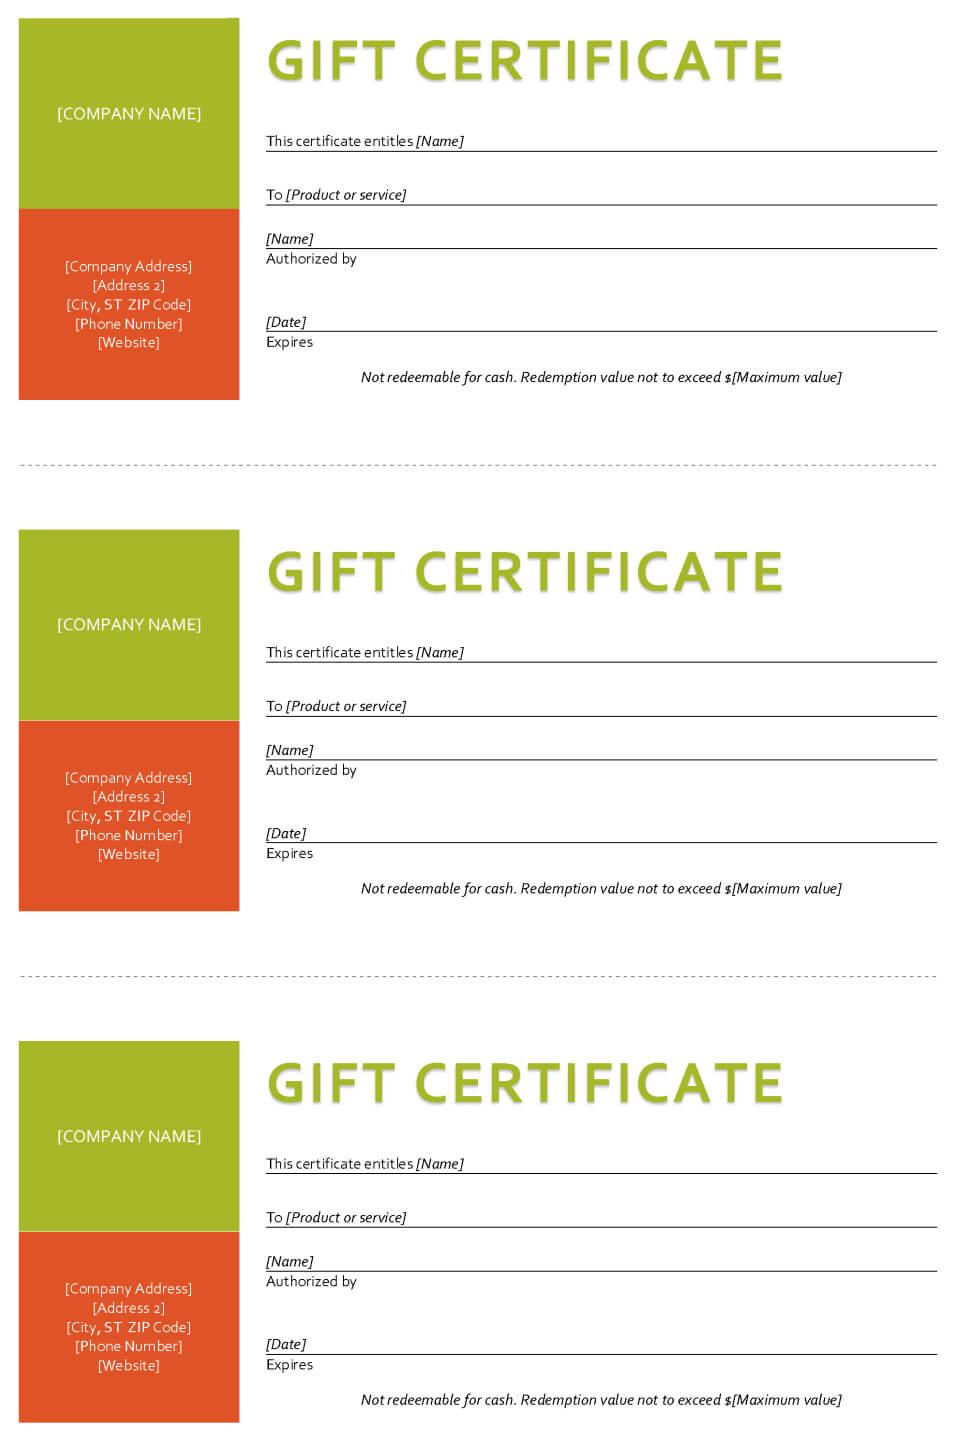 Gift Certificate Template – Sample Gift Certificate Regarding Company Gift Certificate Template